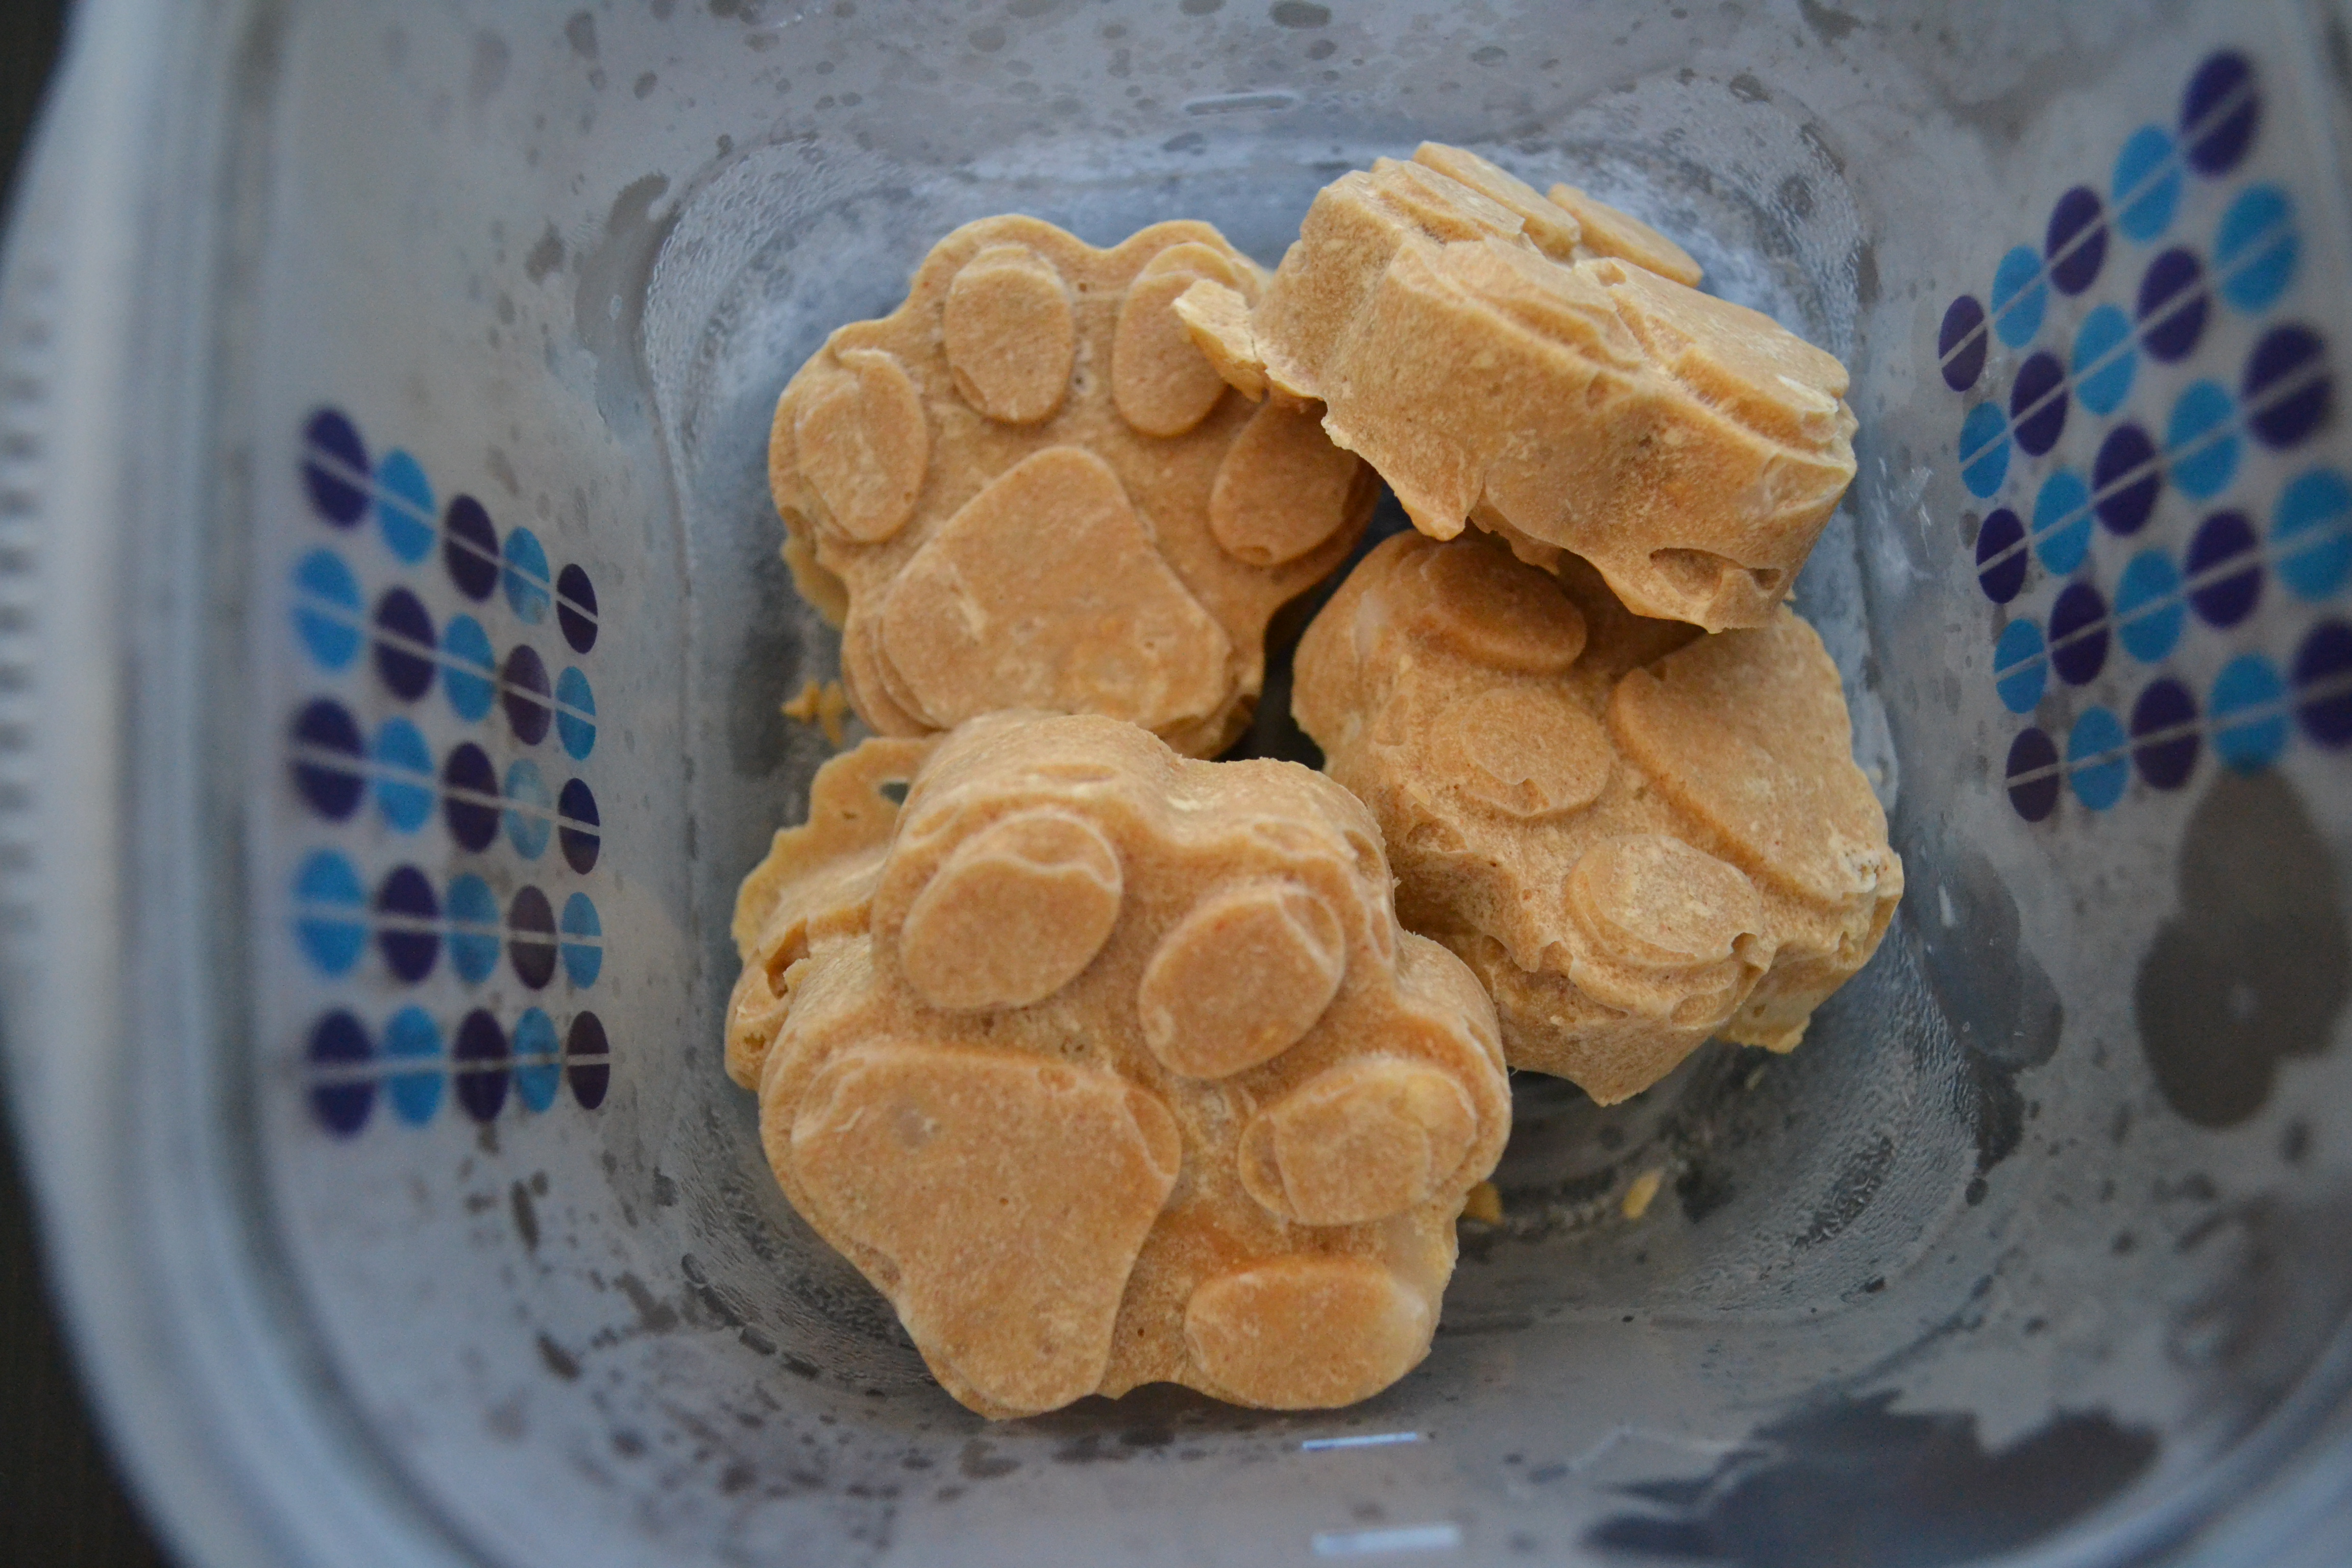 Frozen dog treats with coconut oil